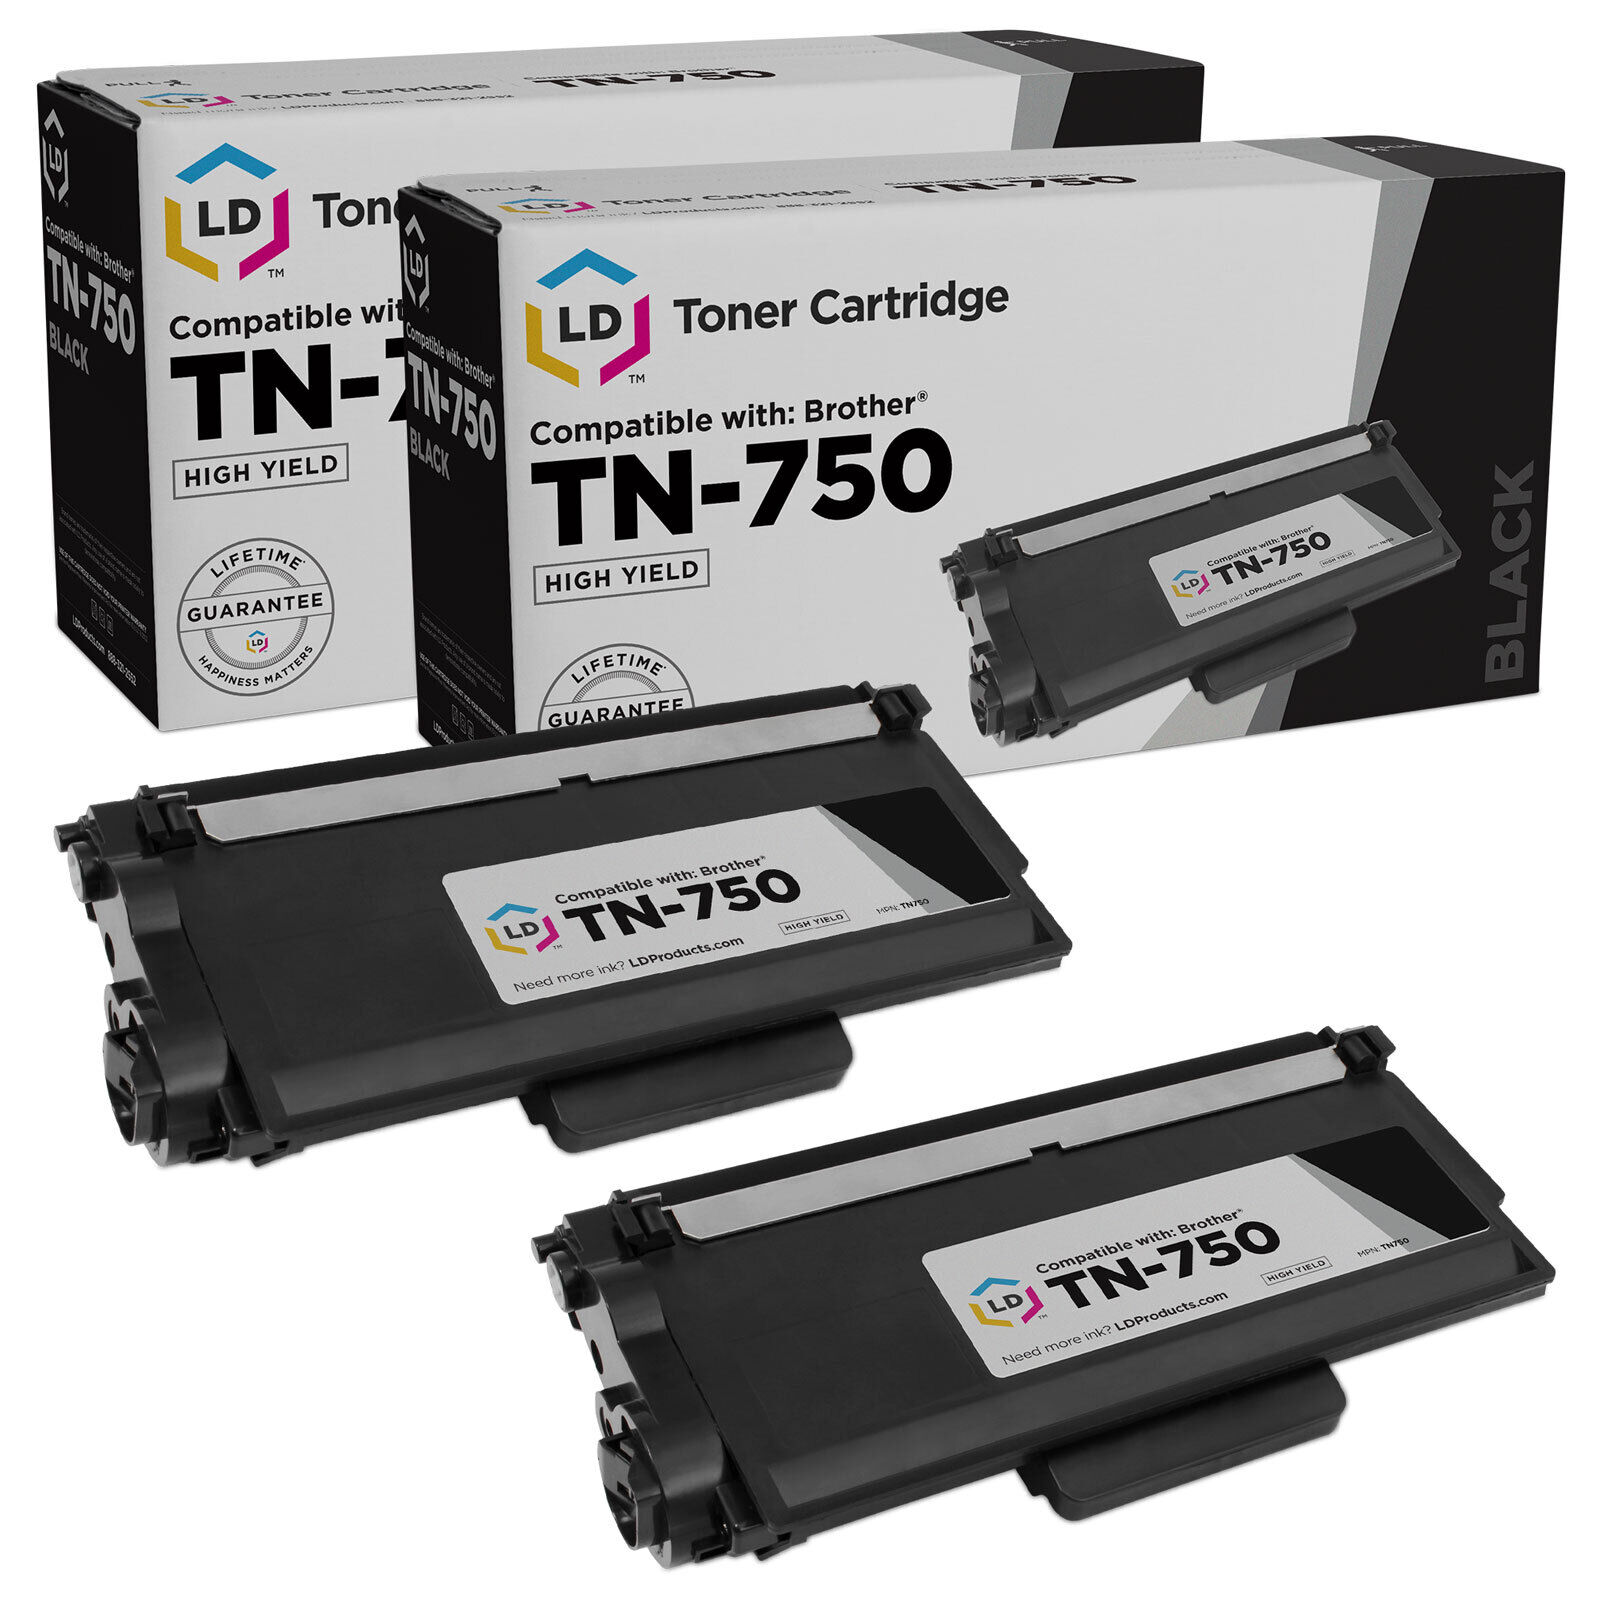 LD 2 Pack TN750 Black Laser HY Toner Cartridge for Brother MFC-8810DW DCP-8155DN